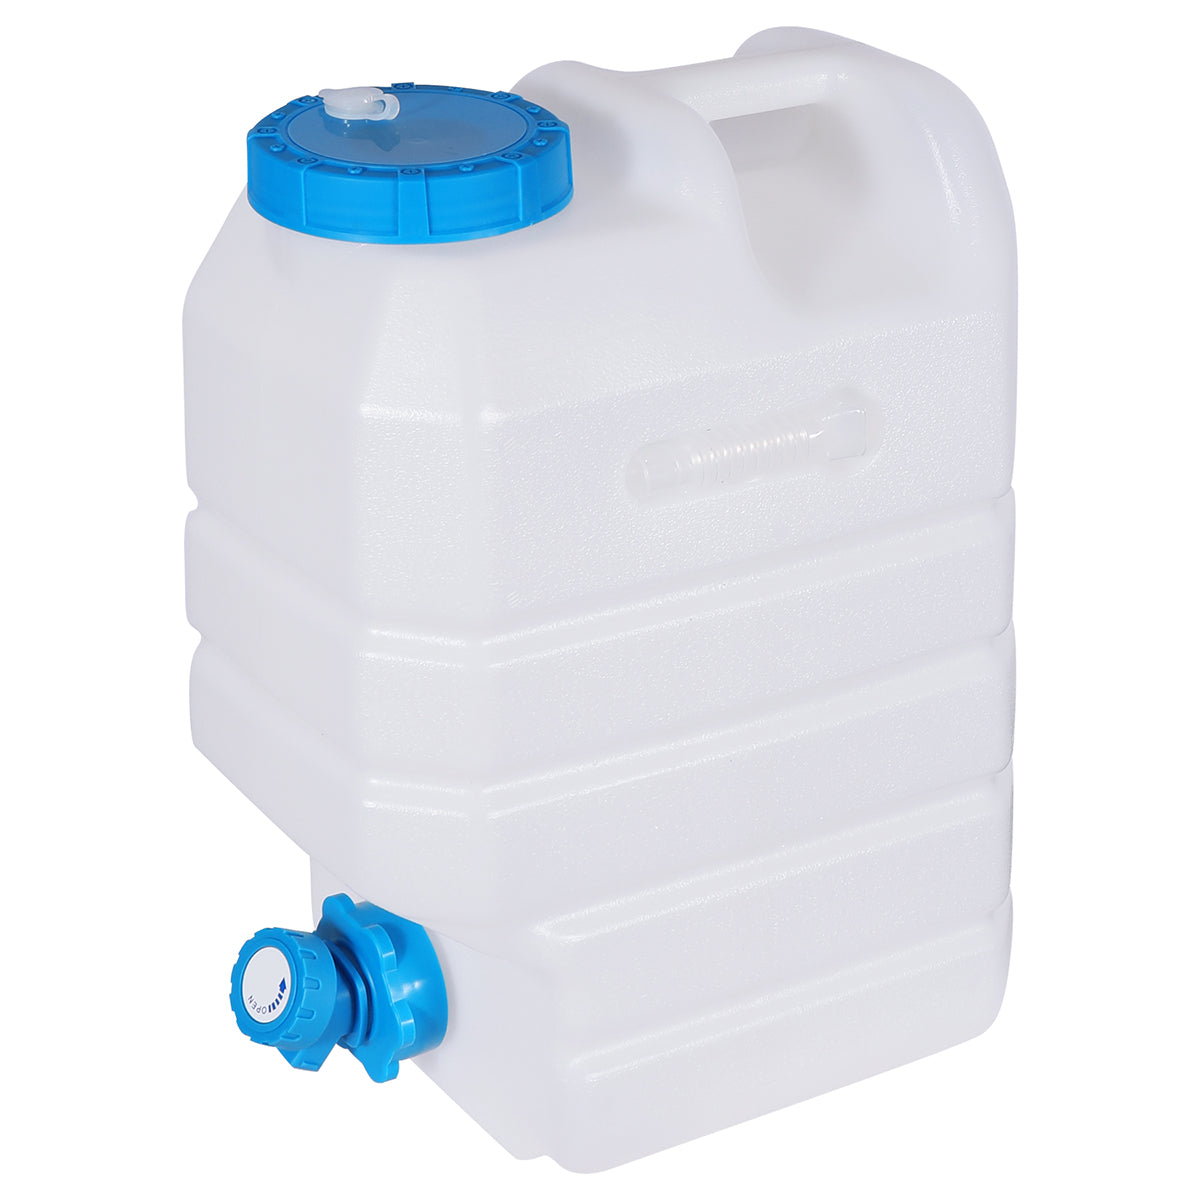 Portable Camping Water Container with Spigot and Wheels